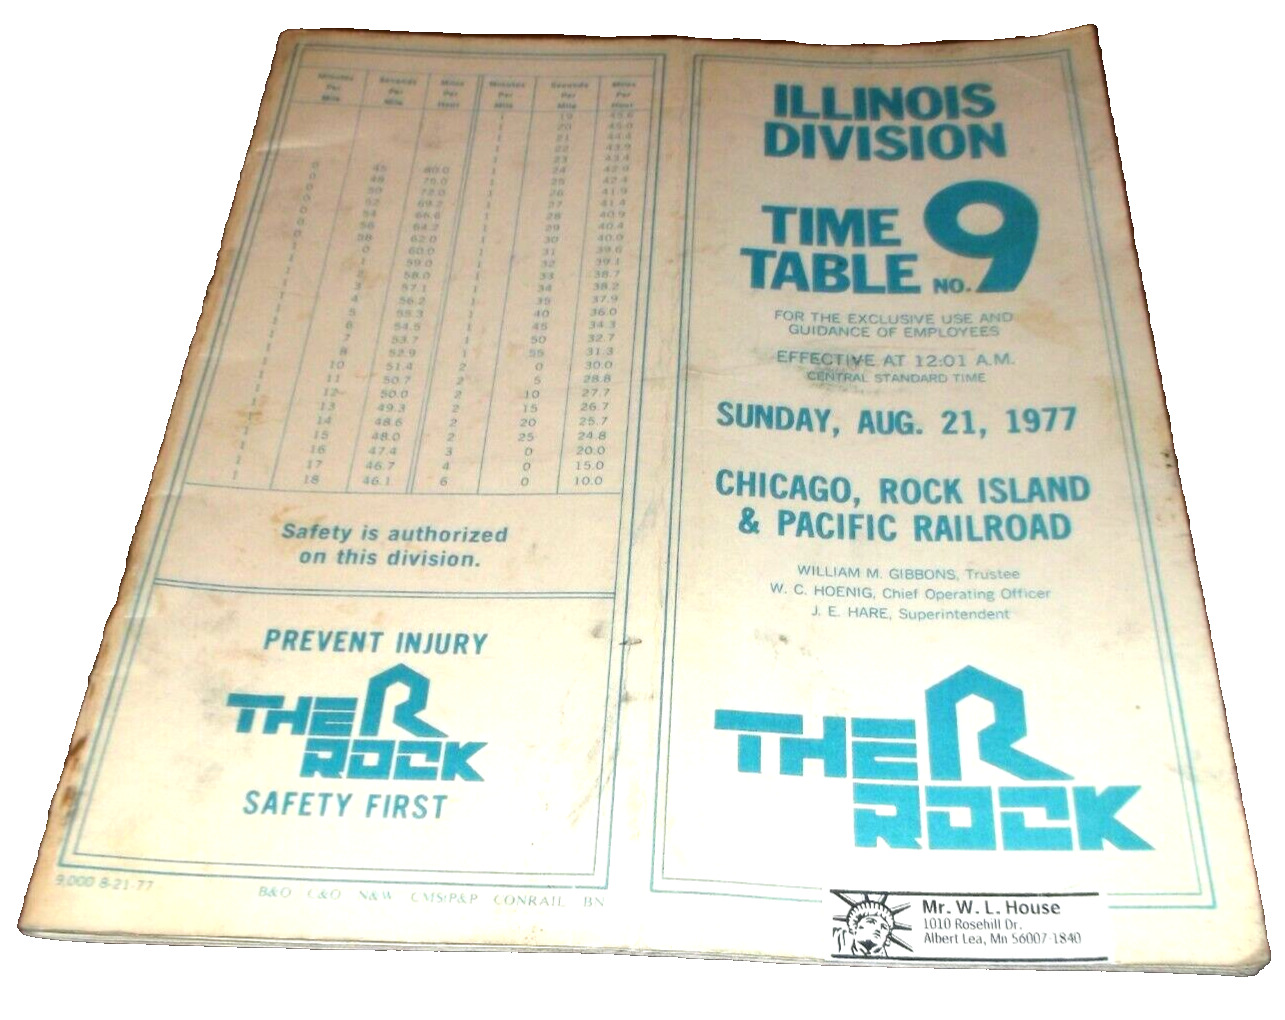 AUGUST 1977 CRI&P ROCK ISLAND ILLINOIS DIVISIONS EMPLOYEE TIMETABLE #9